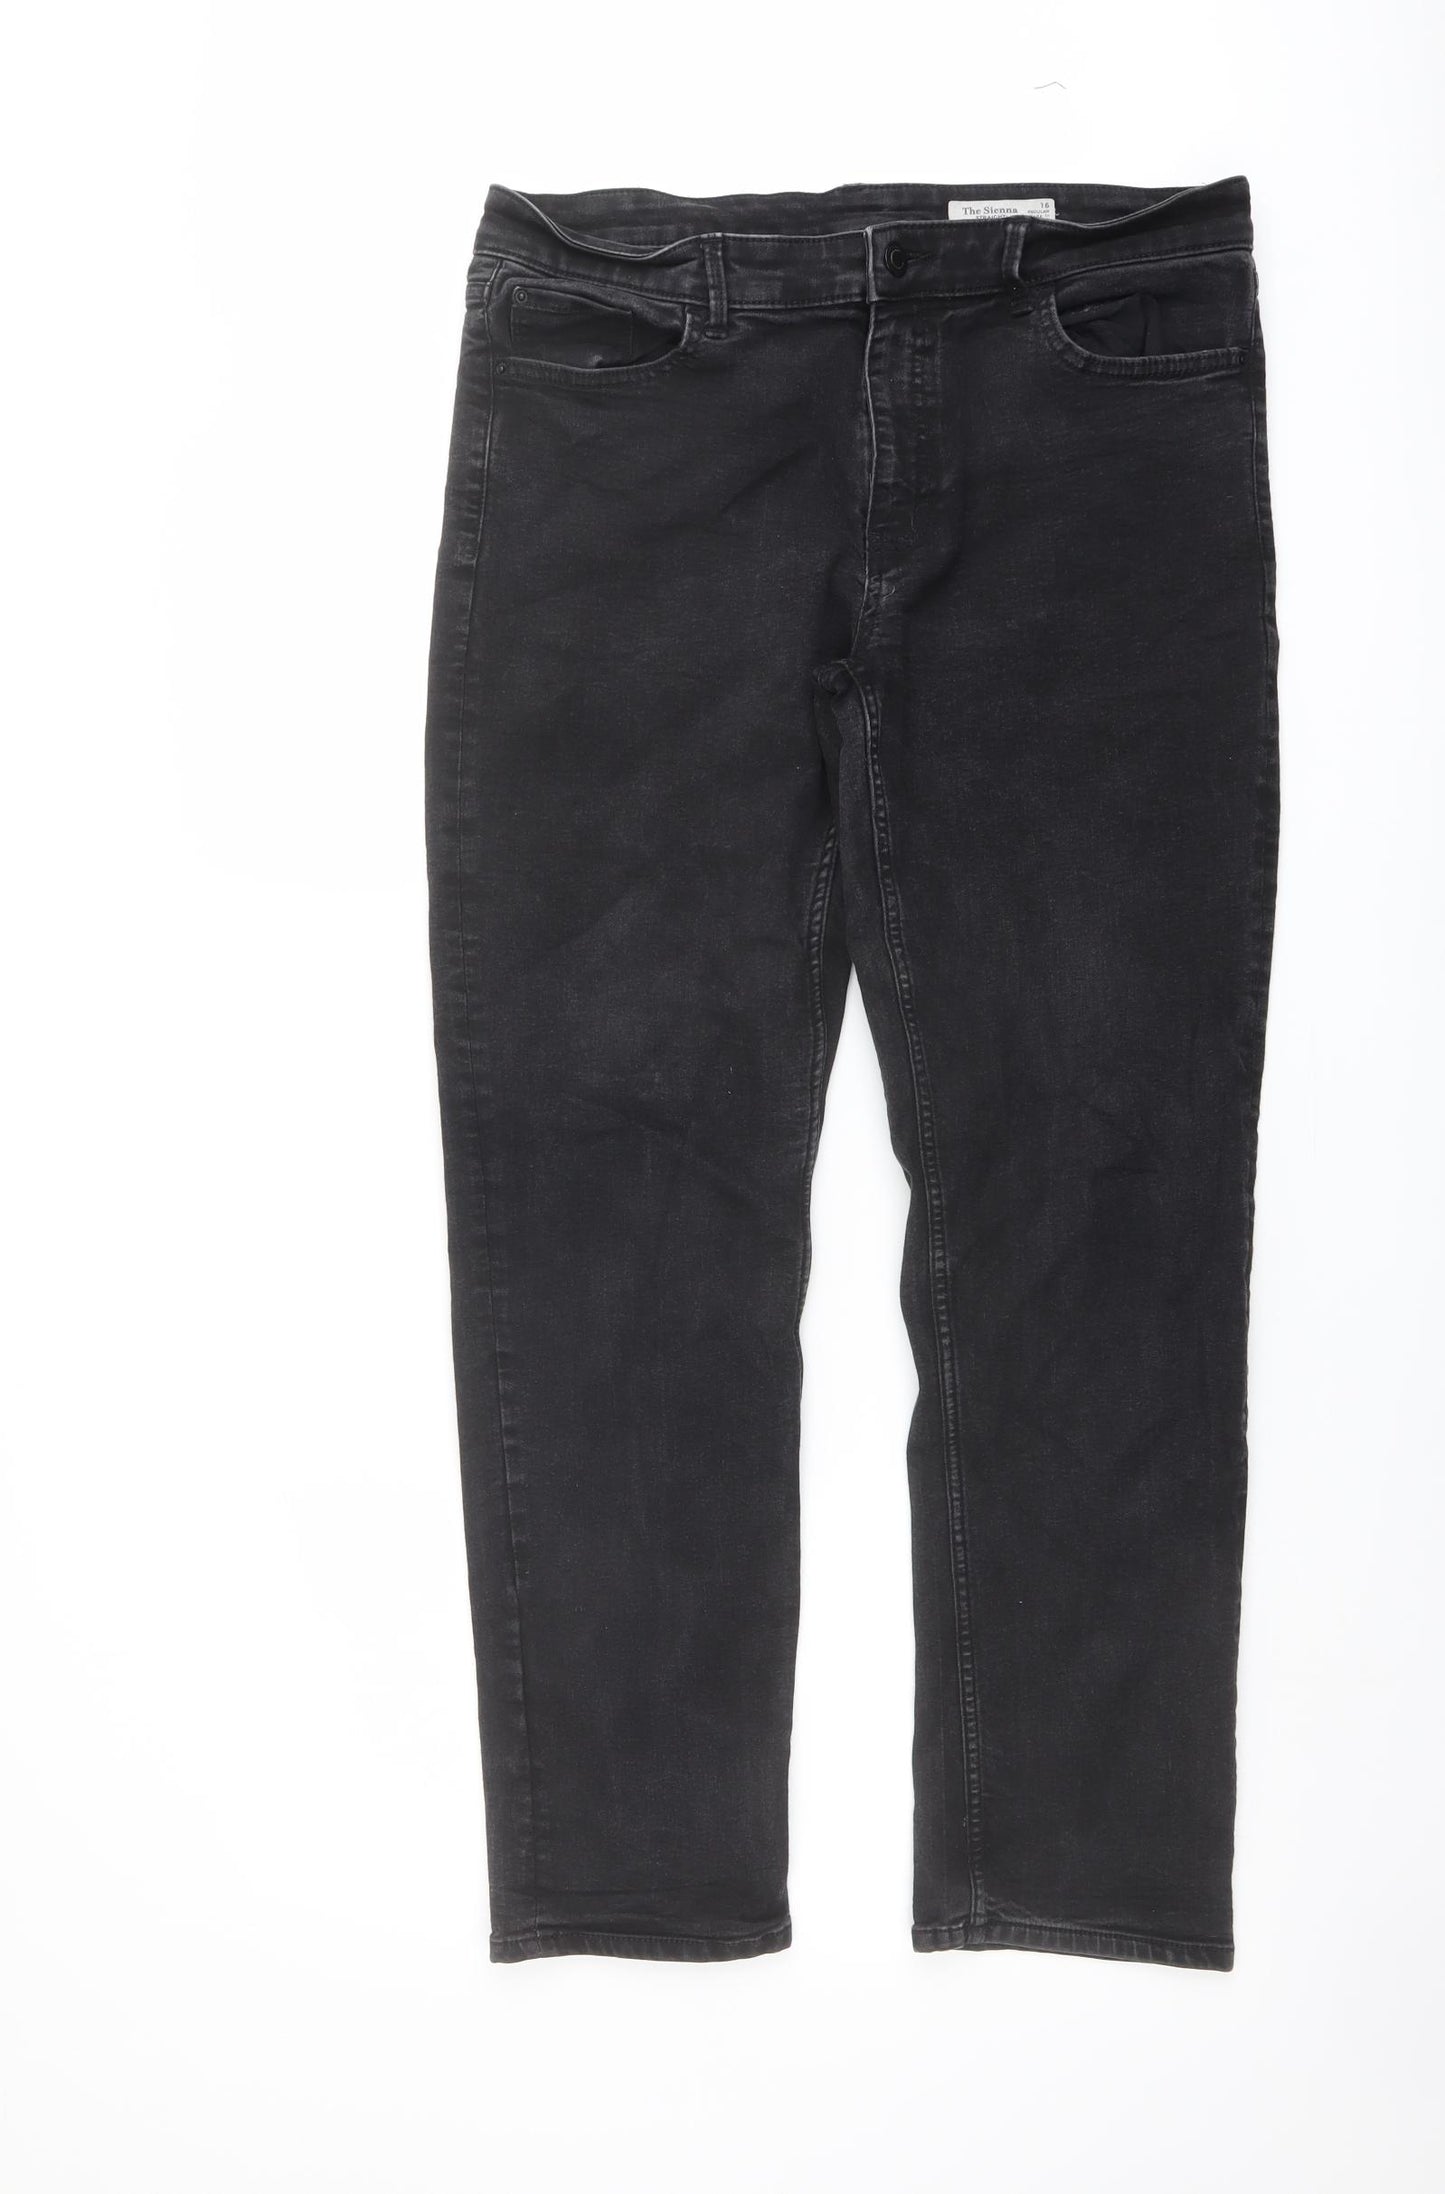 Marks and Spencer Womens Black Cotton Straight Jeans Size 16 L28 in Regular Button